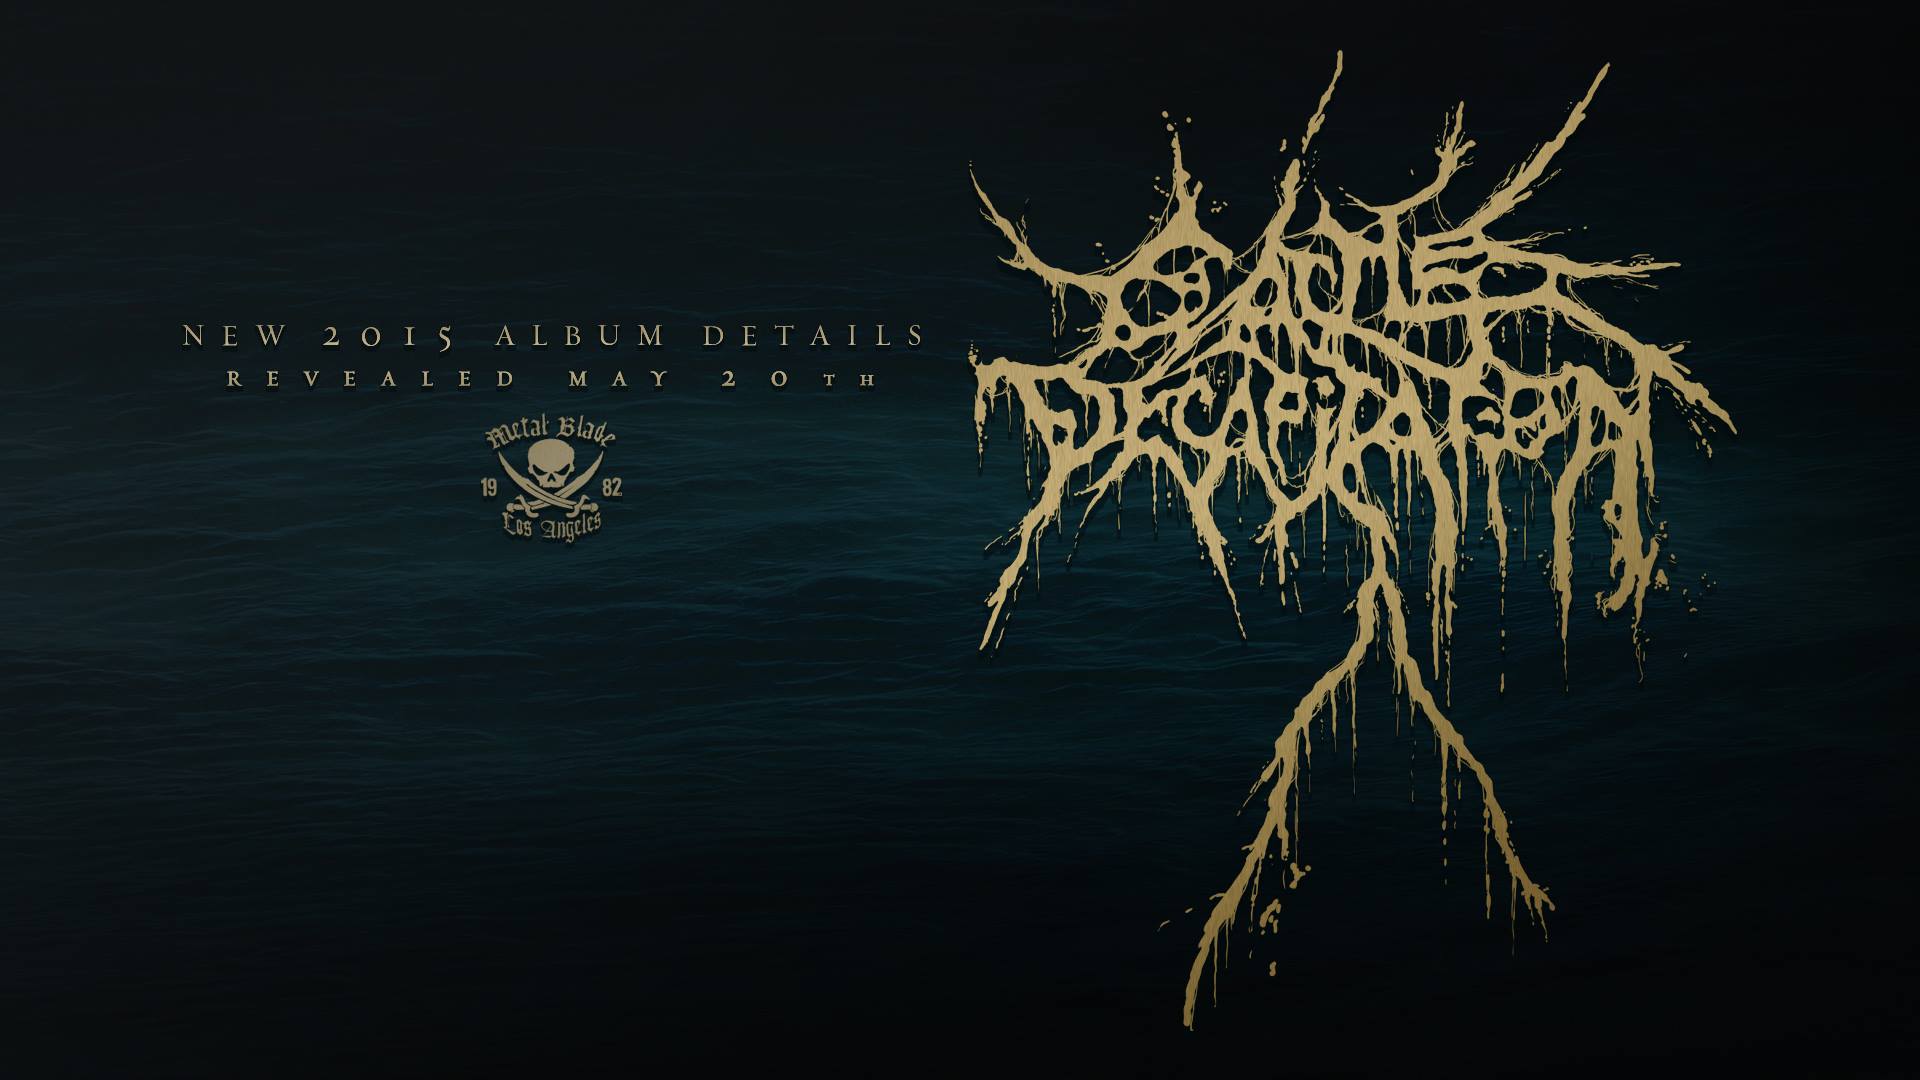 Cattle Decapitation Announcement of Announcement Blog Is Heavy